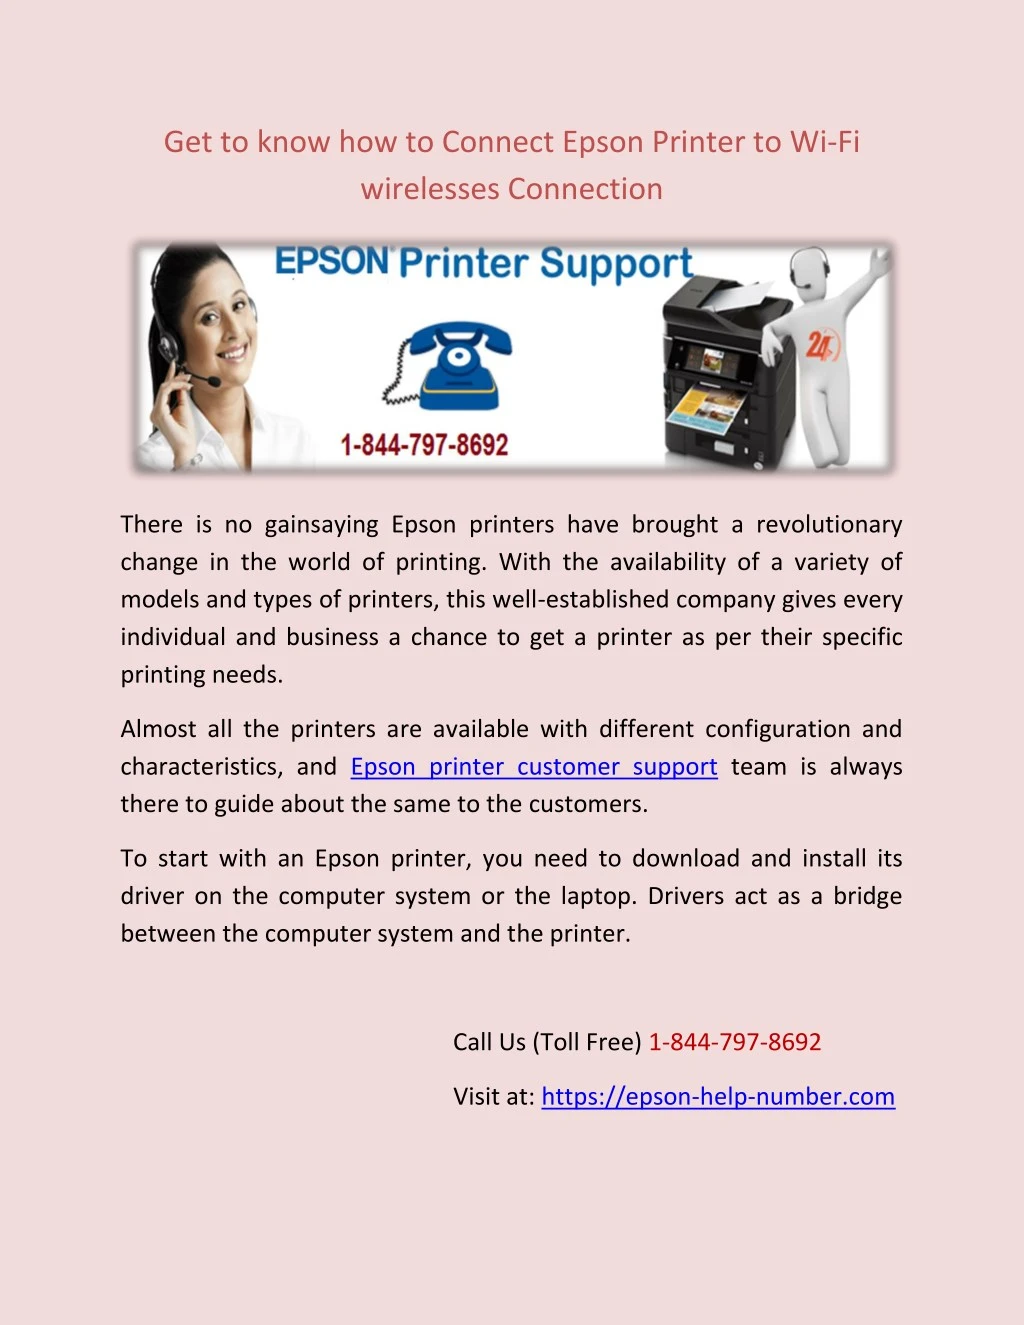 get to know how to connect epson printer